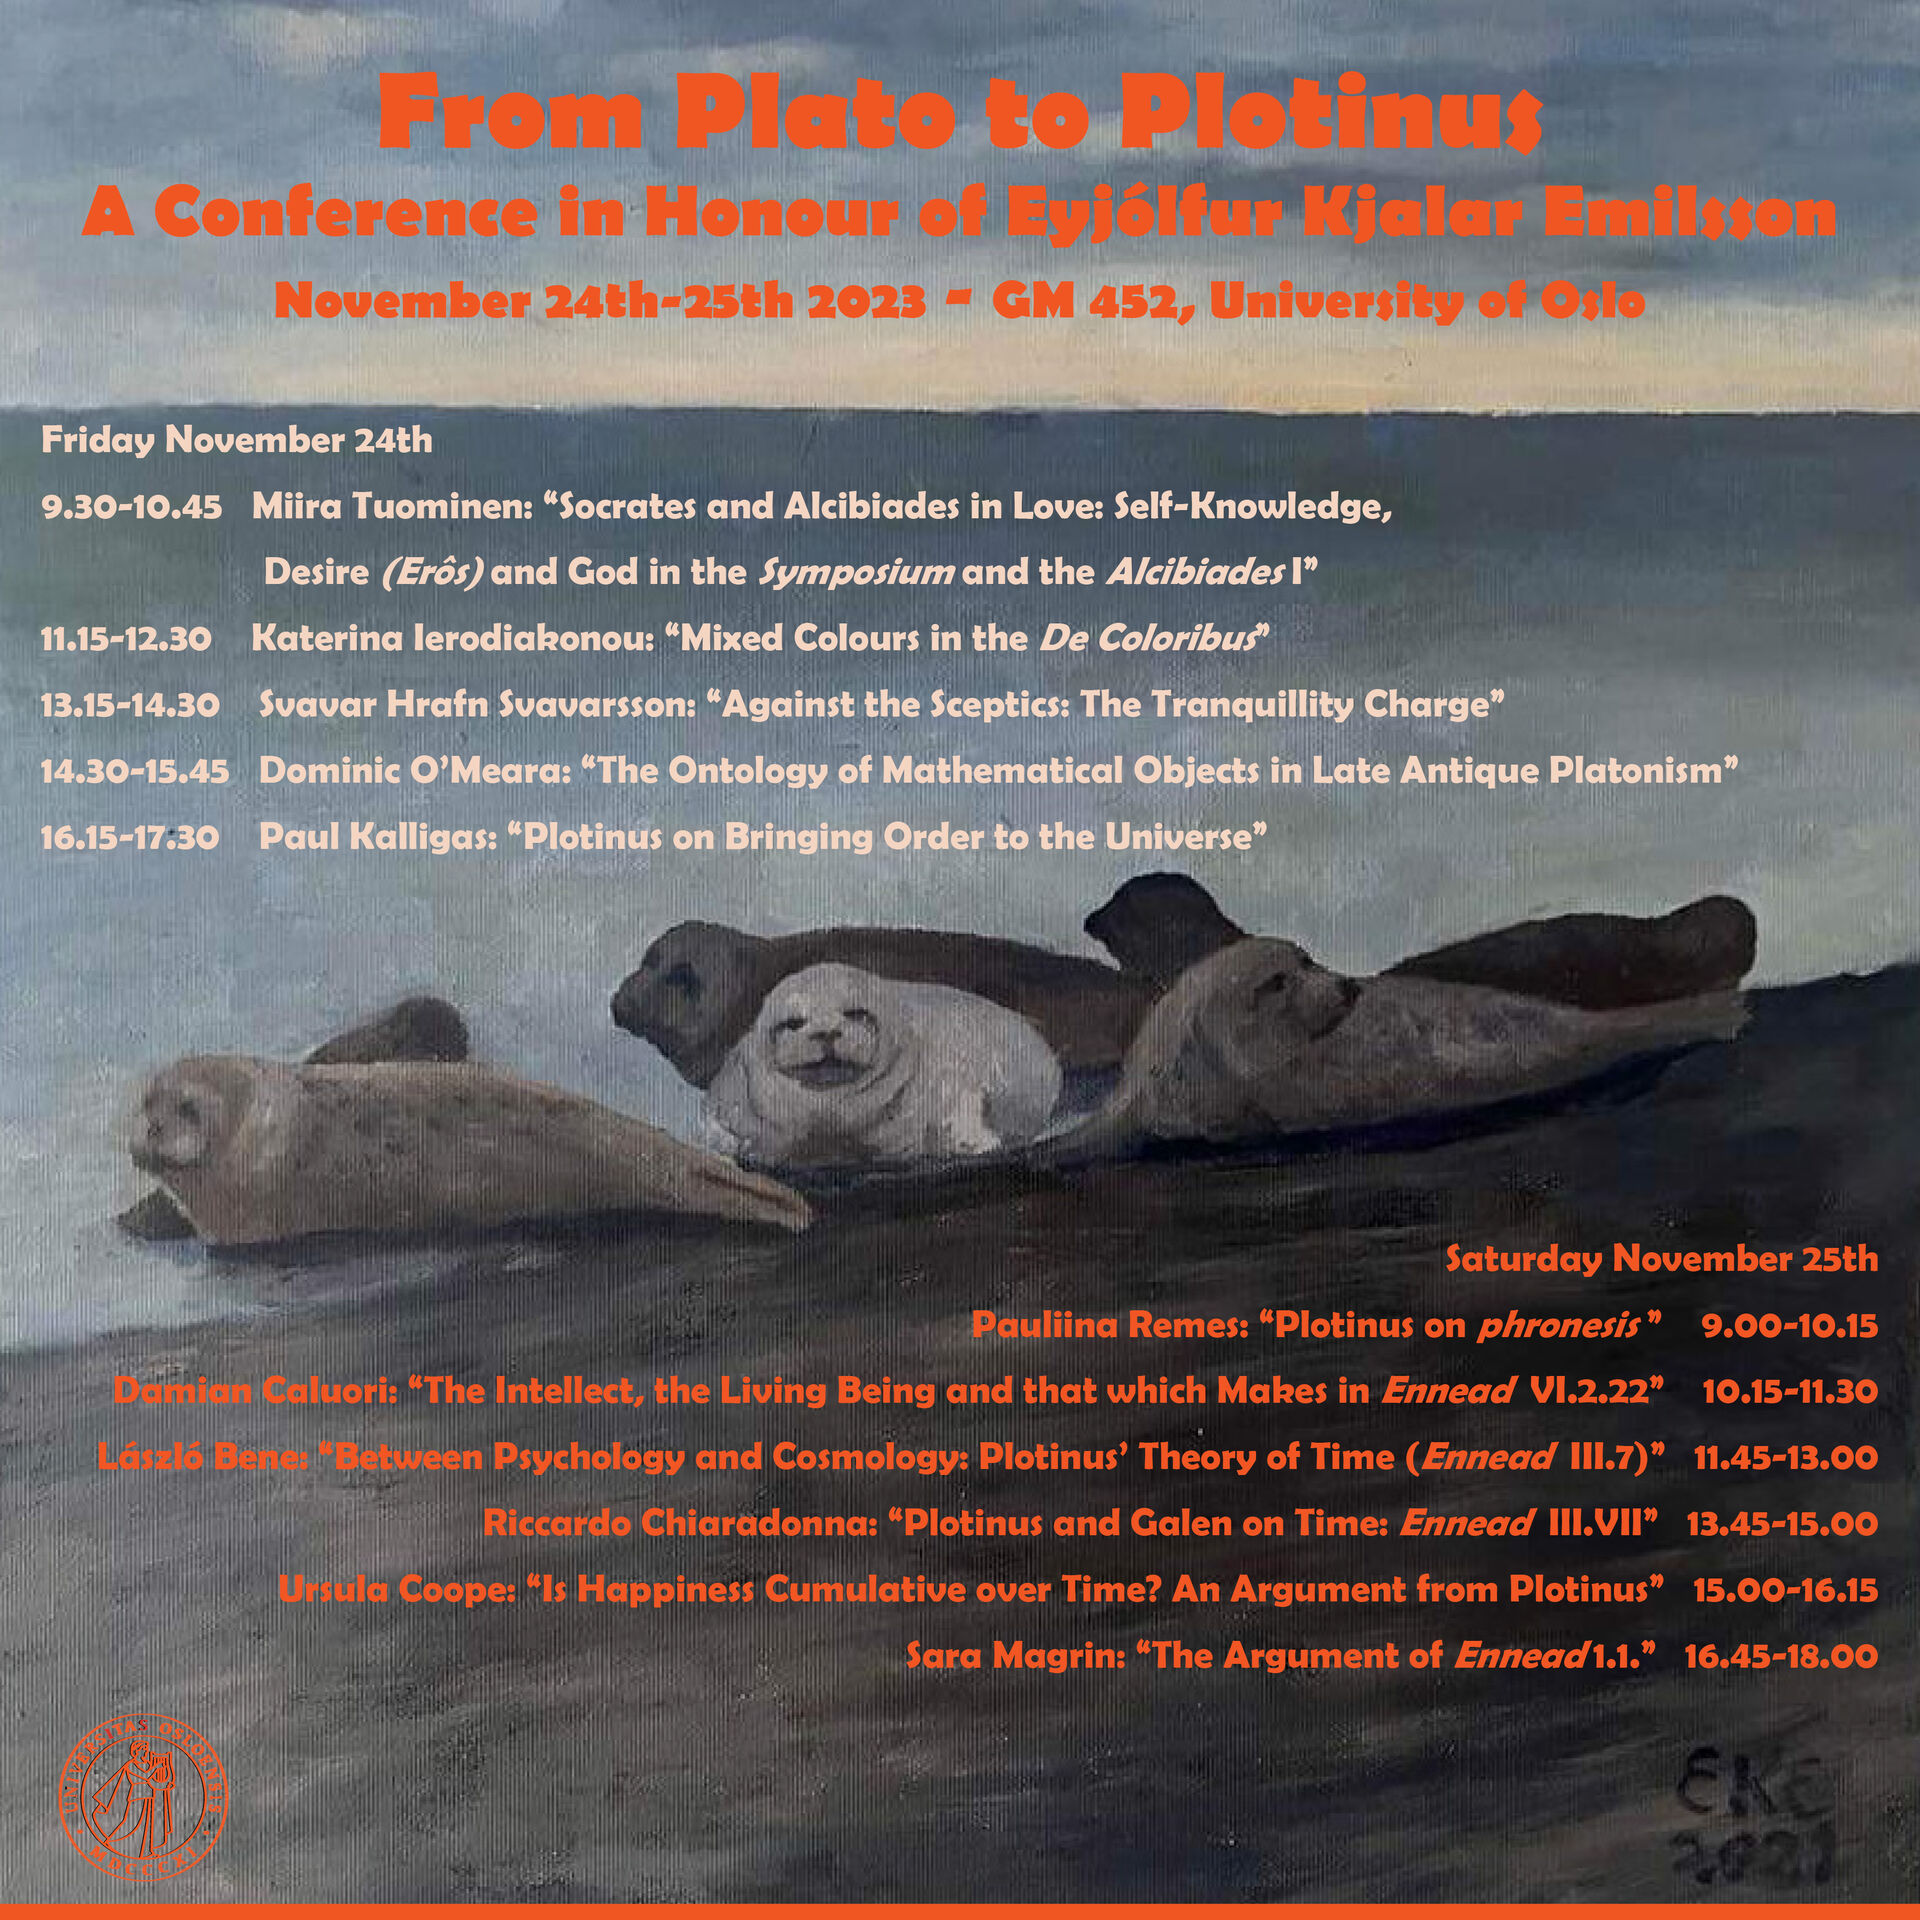 A poster with the program for the conference "From Plato to Plotinus" written in text on a painting of seals.